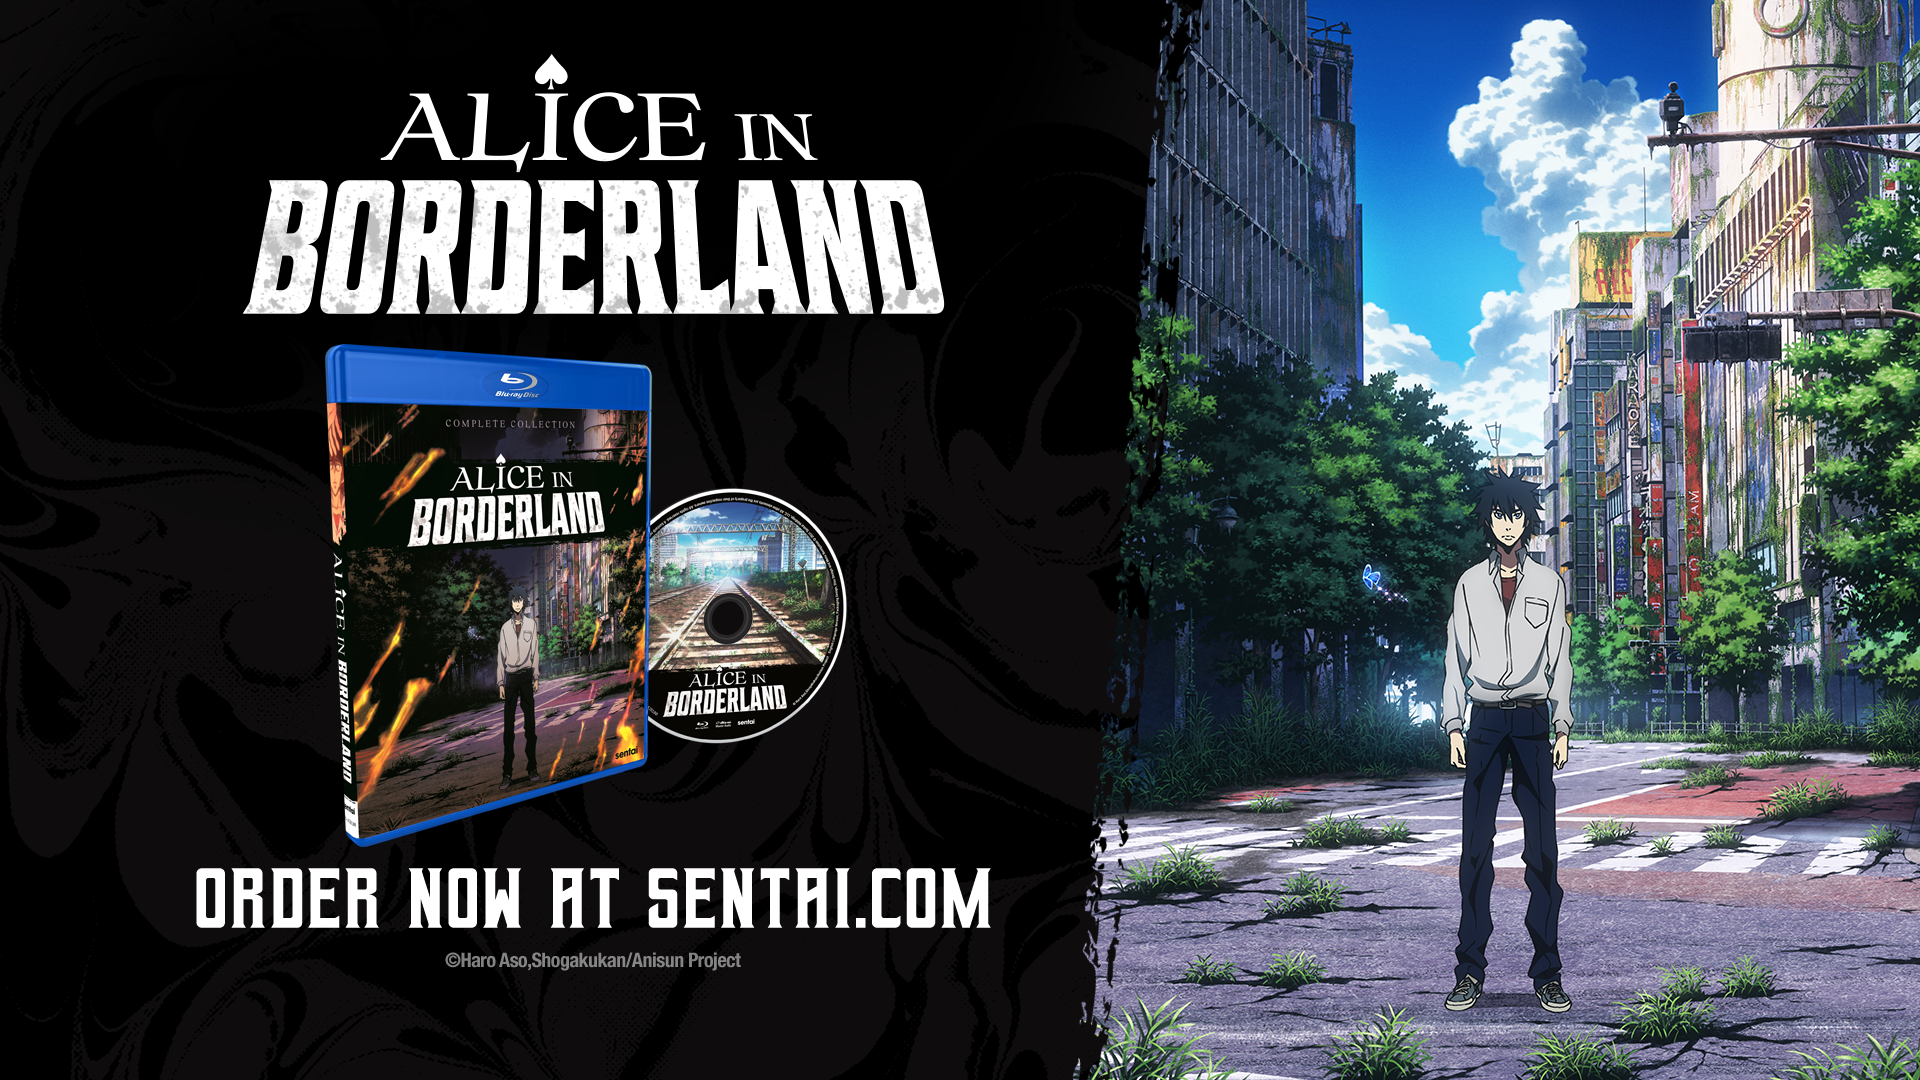 The Alice in Borderland OVA Blu-ray along with the key art. The text says, "Order now at sentai.com"